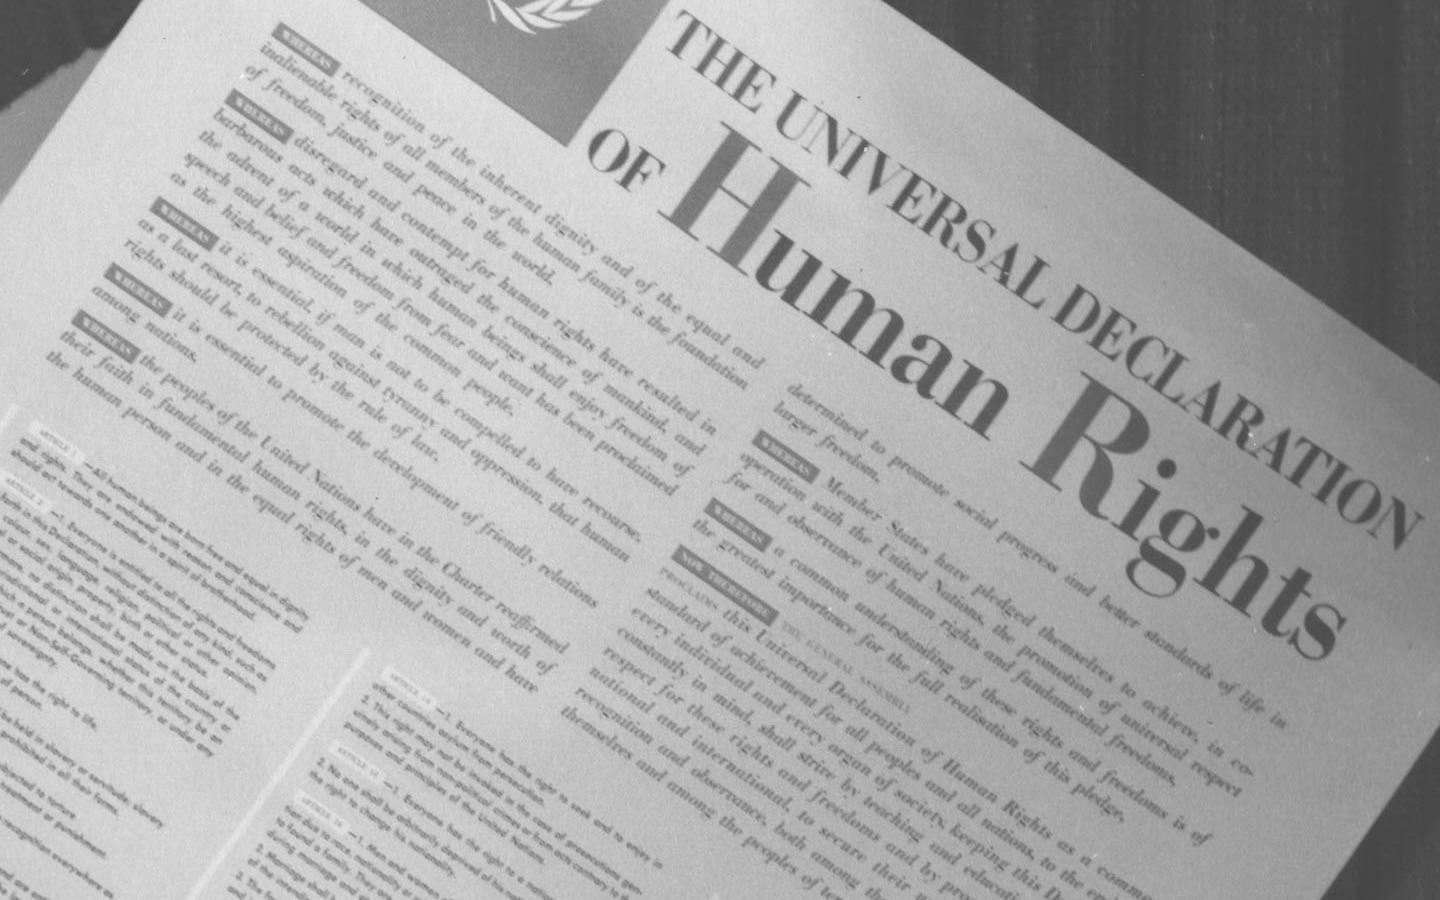 essay on the universal declaration of human rights